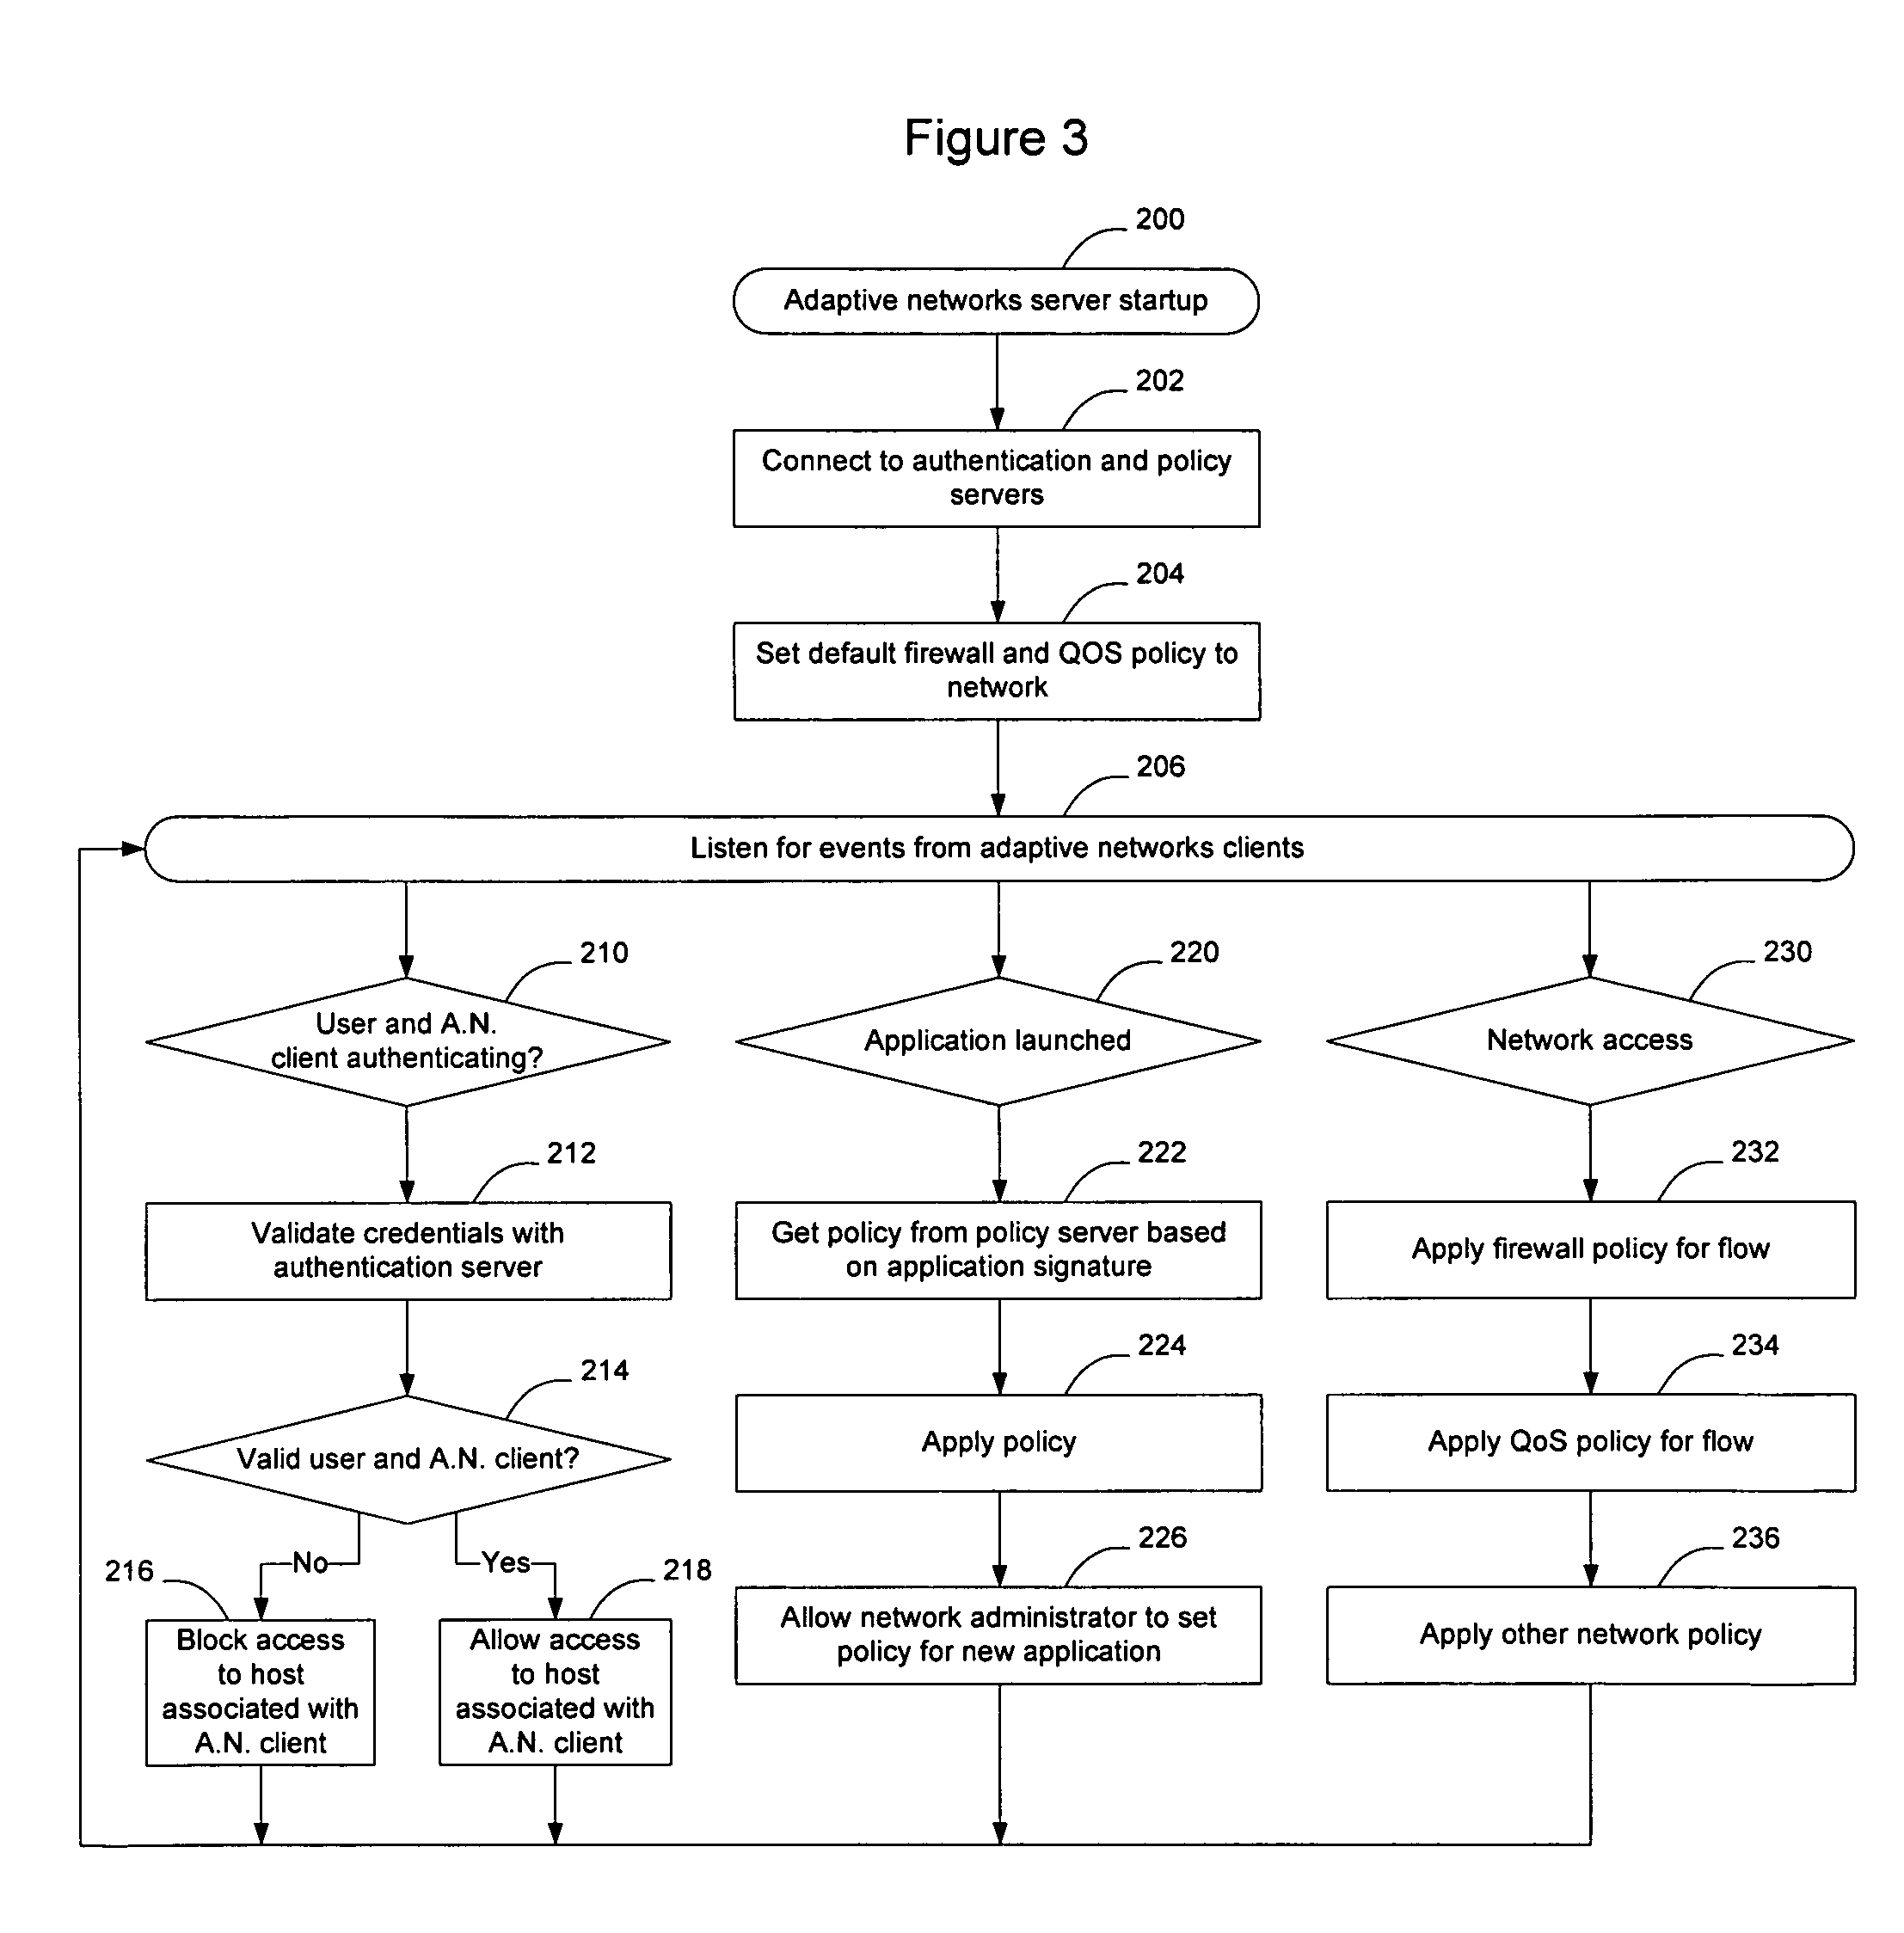 Method and apparatus for adapting a communication network according to information provided by a trusted client